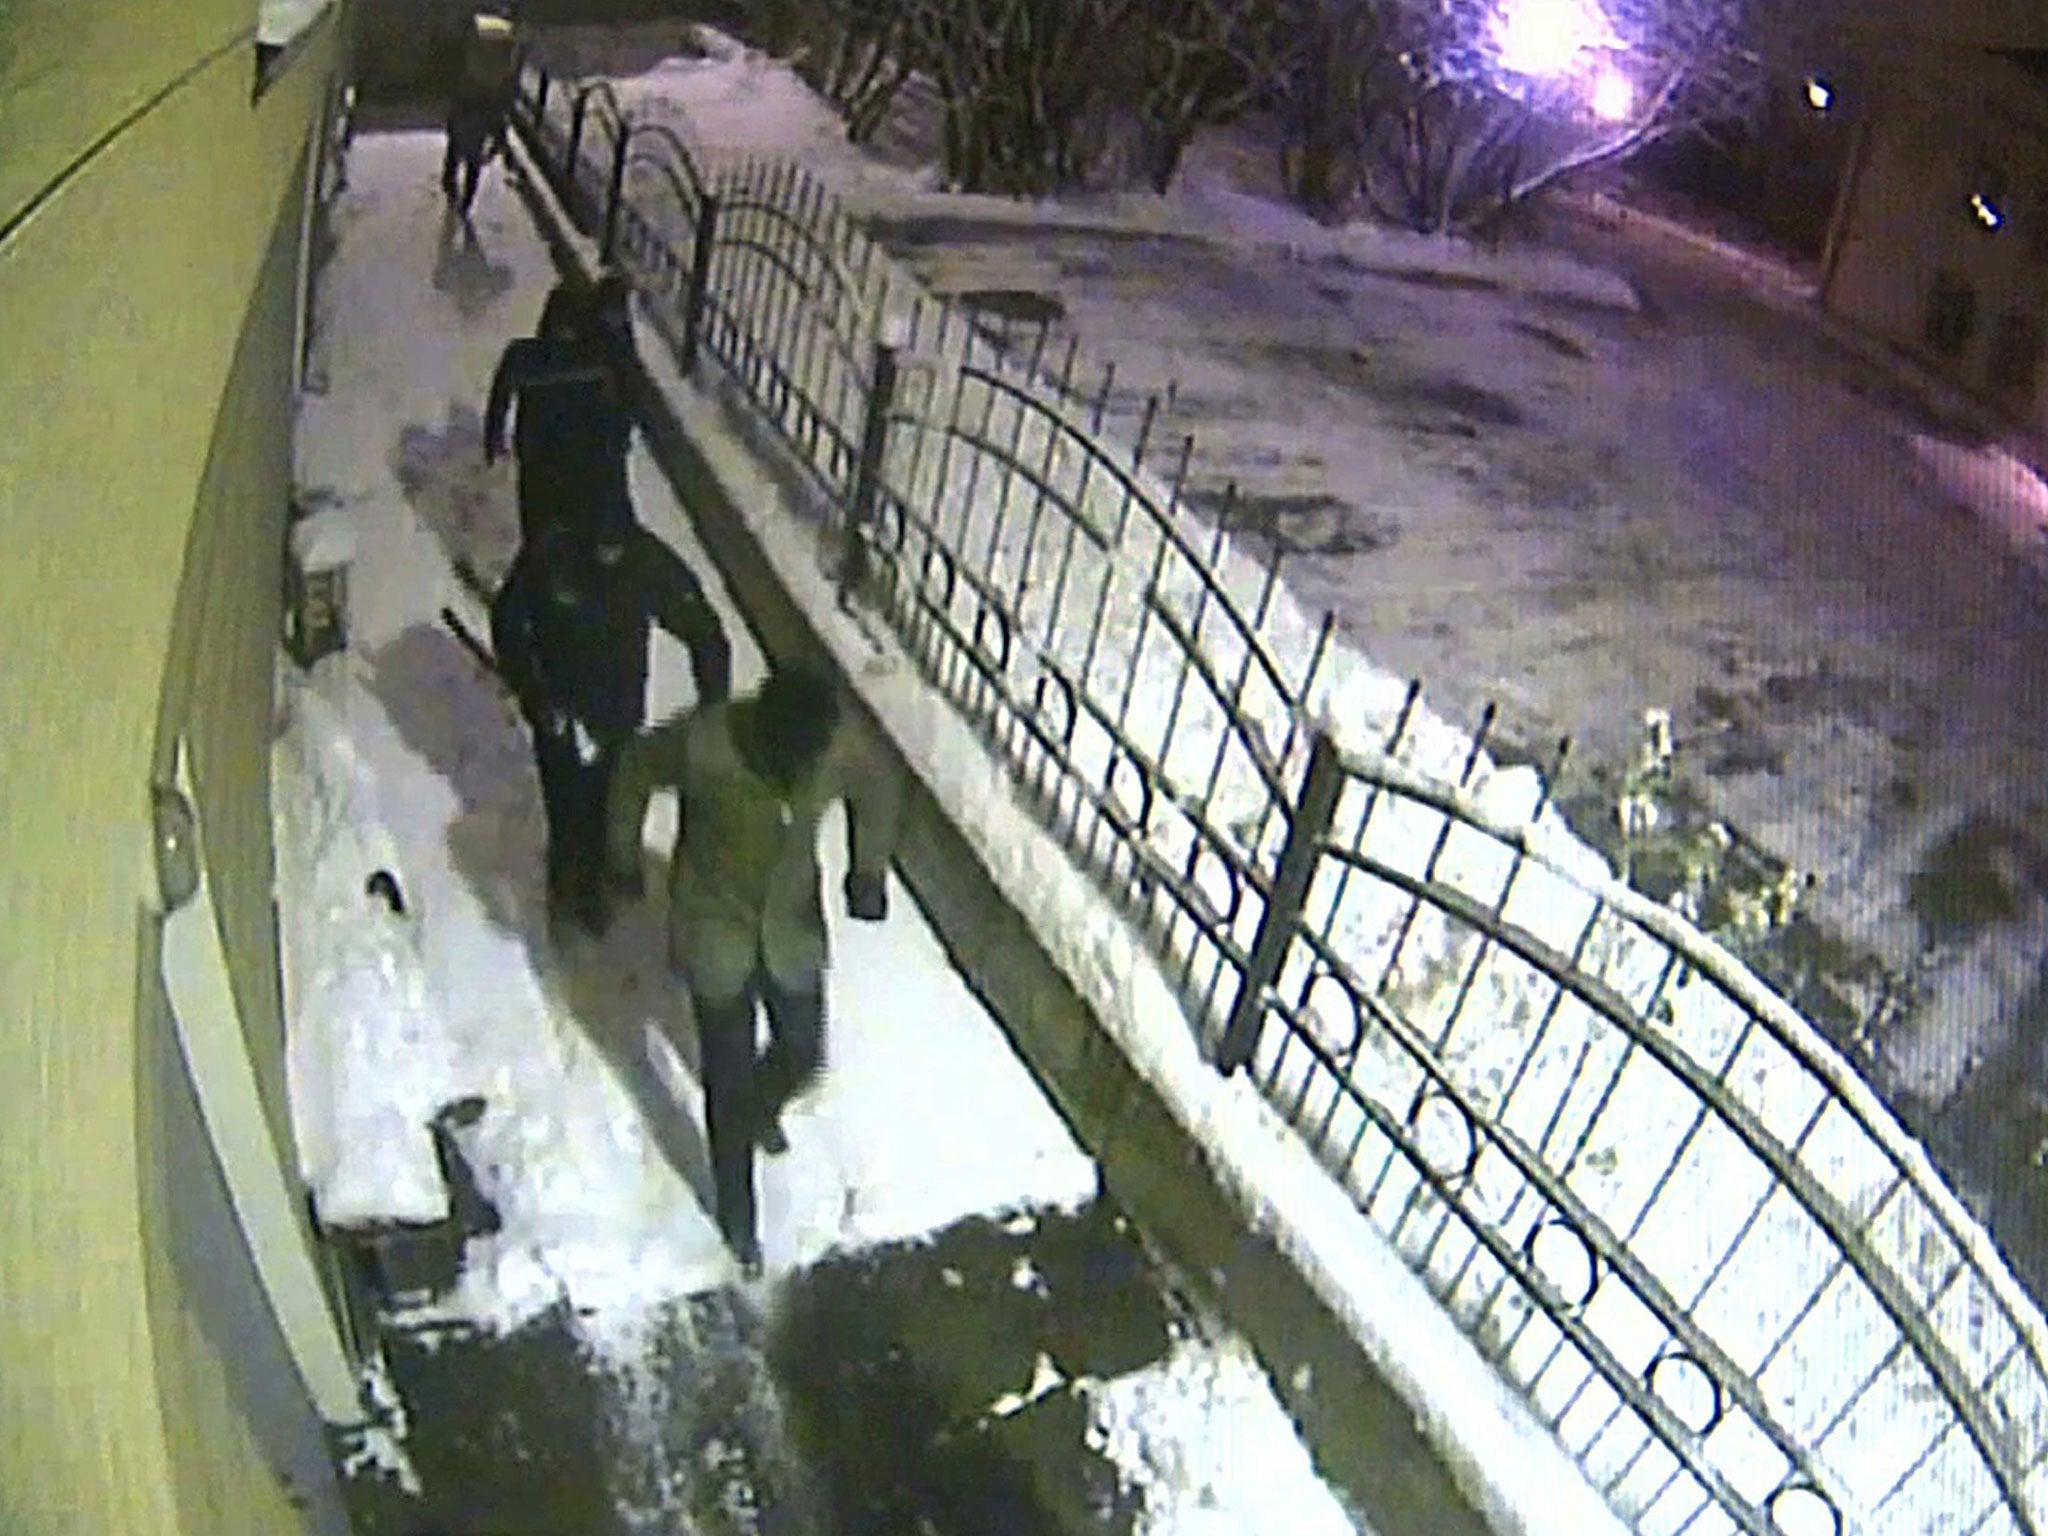 CCTV footage shows six men enter the grounds of Greenpeace Office in Murmansk